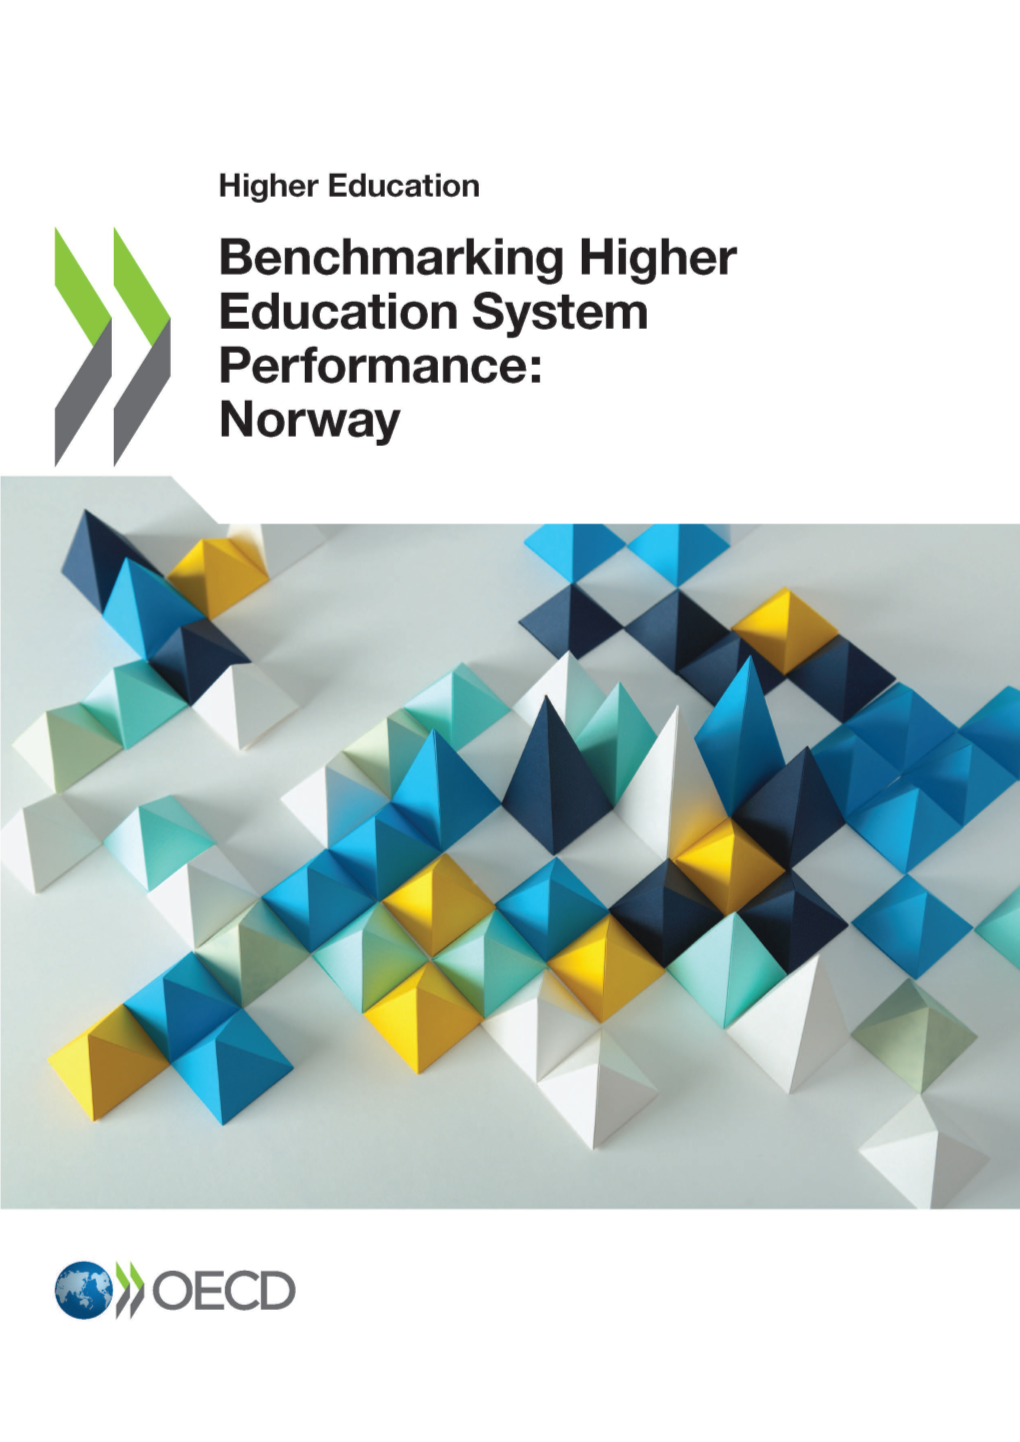 Benchmarking Higher Education System Performance: Norway